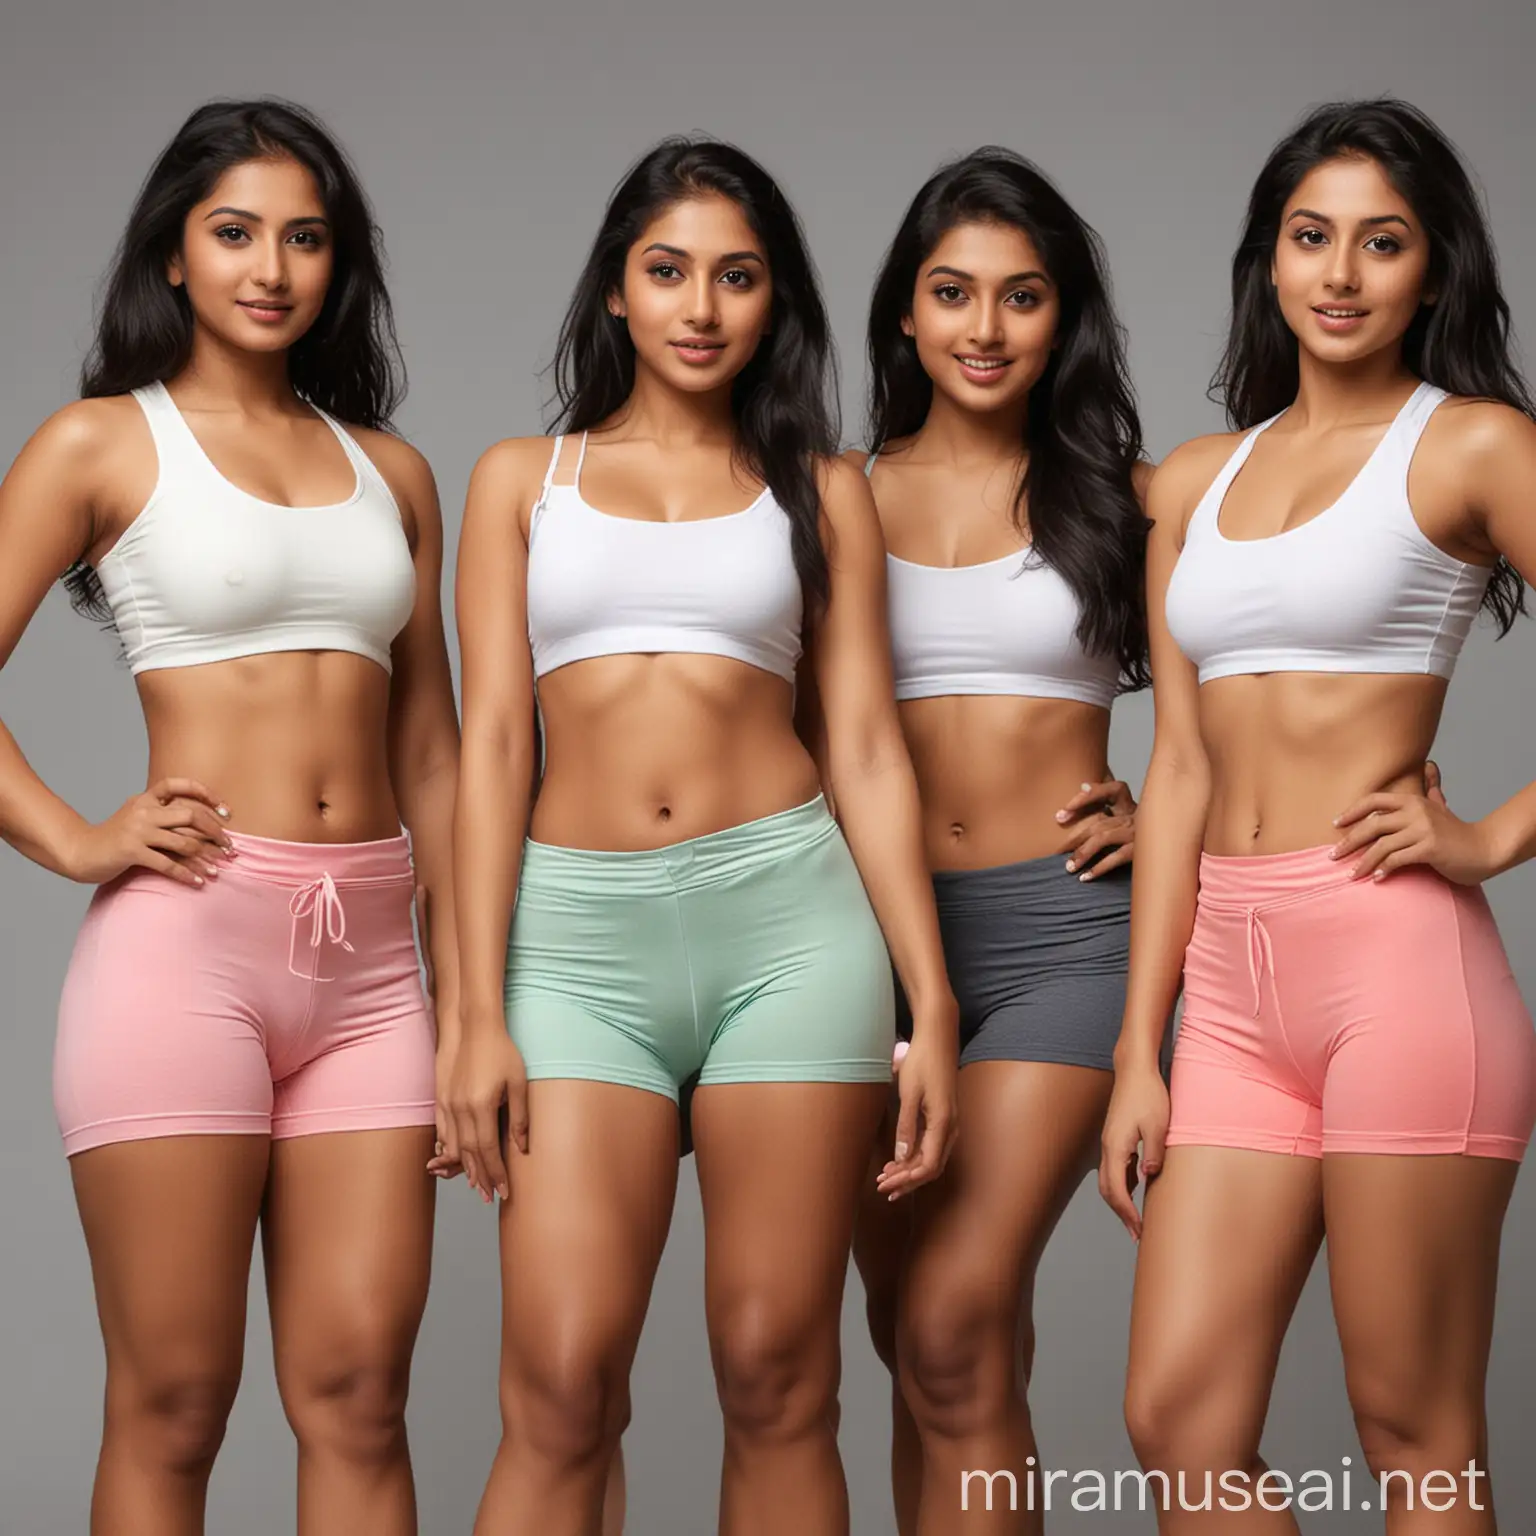  group of sexy indian girls wearing cotton cycling  shorts